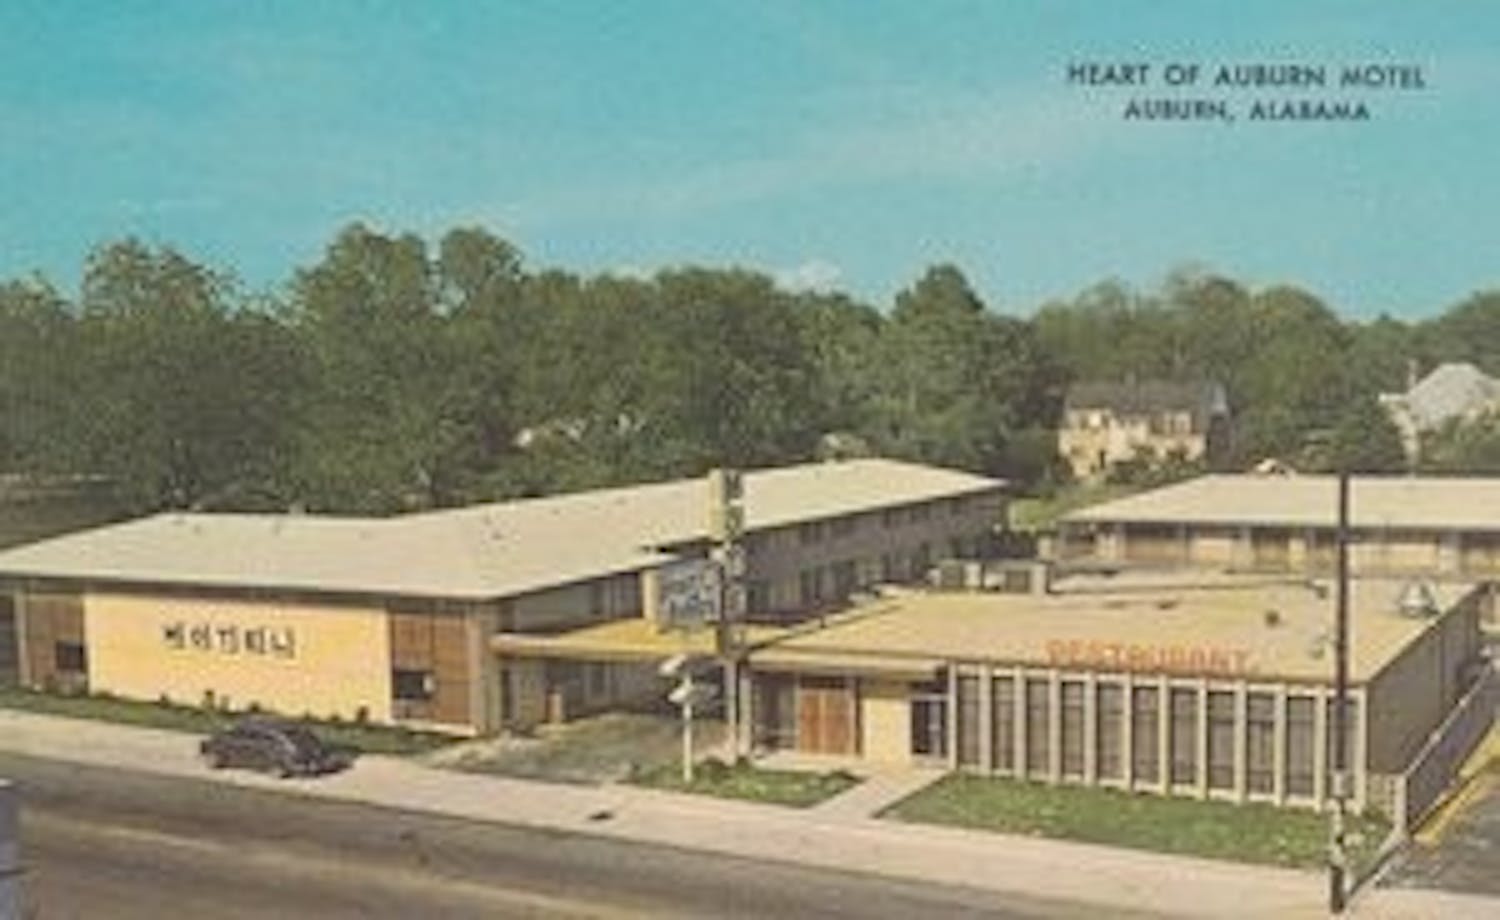 The Heart of Auburn is pictured here as it appeared in the 1970s. The hotel has been a staple of the community for more than 50 years. The hotel will officially close Dec. 16 to make way for a new shopping center called "The Shoppes at the Heart of Auburn." (Courtesy of The War Eagle Reader)